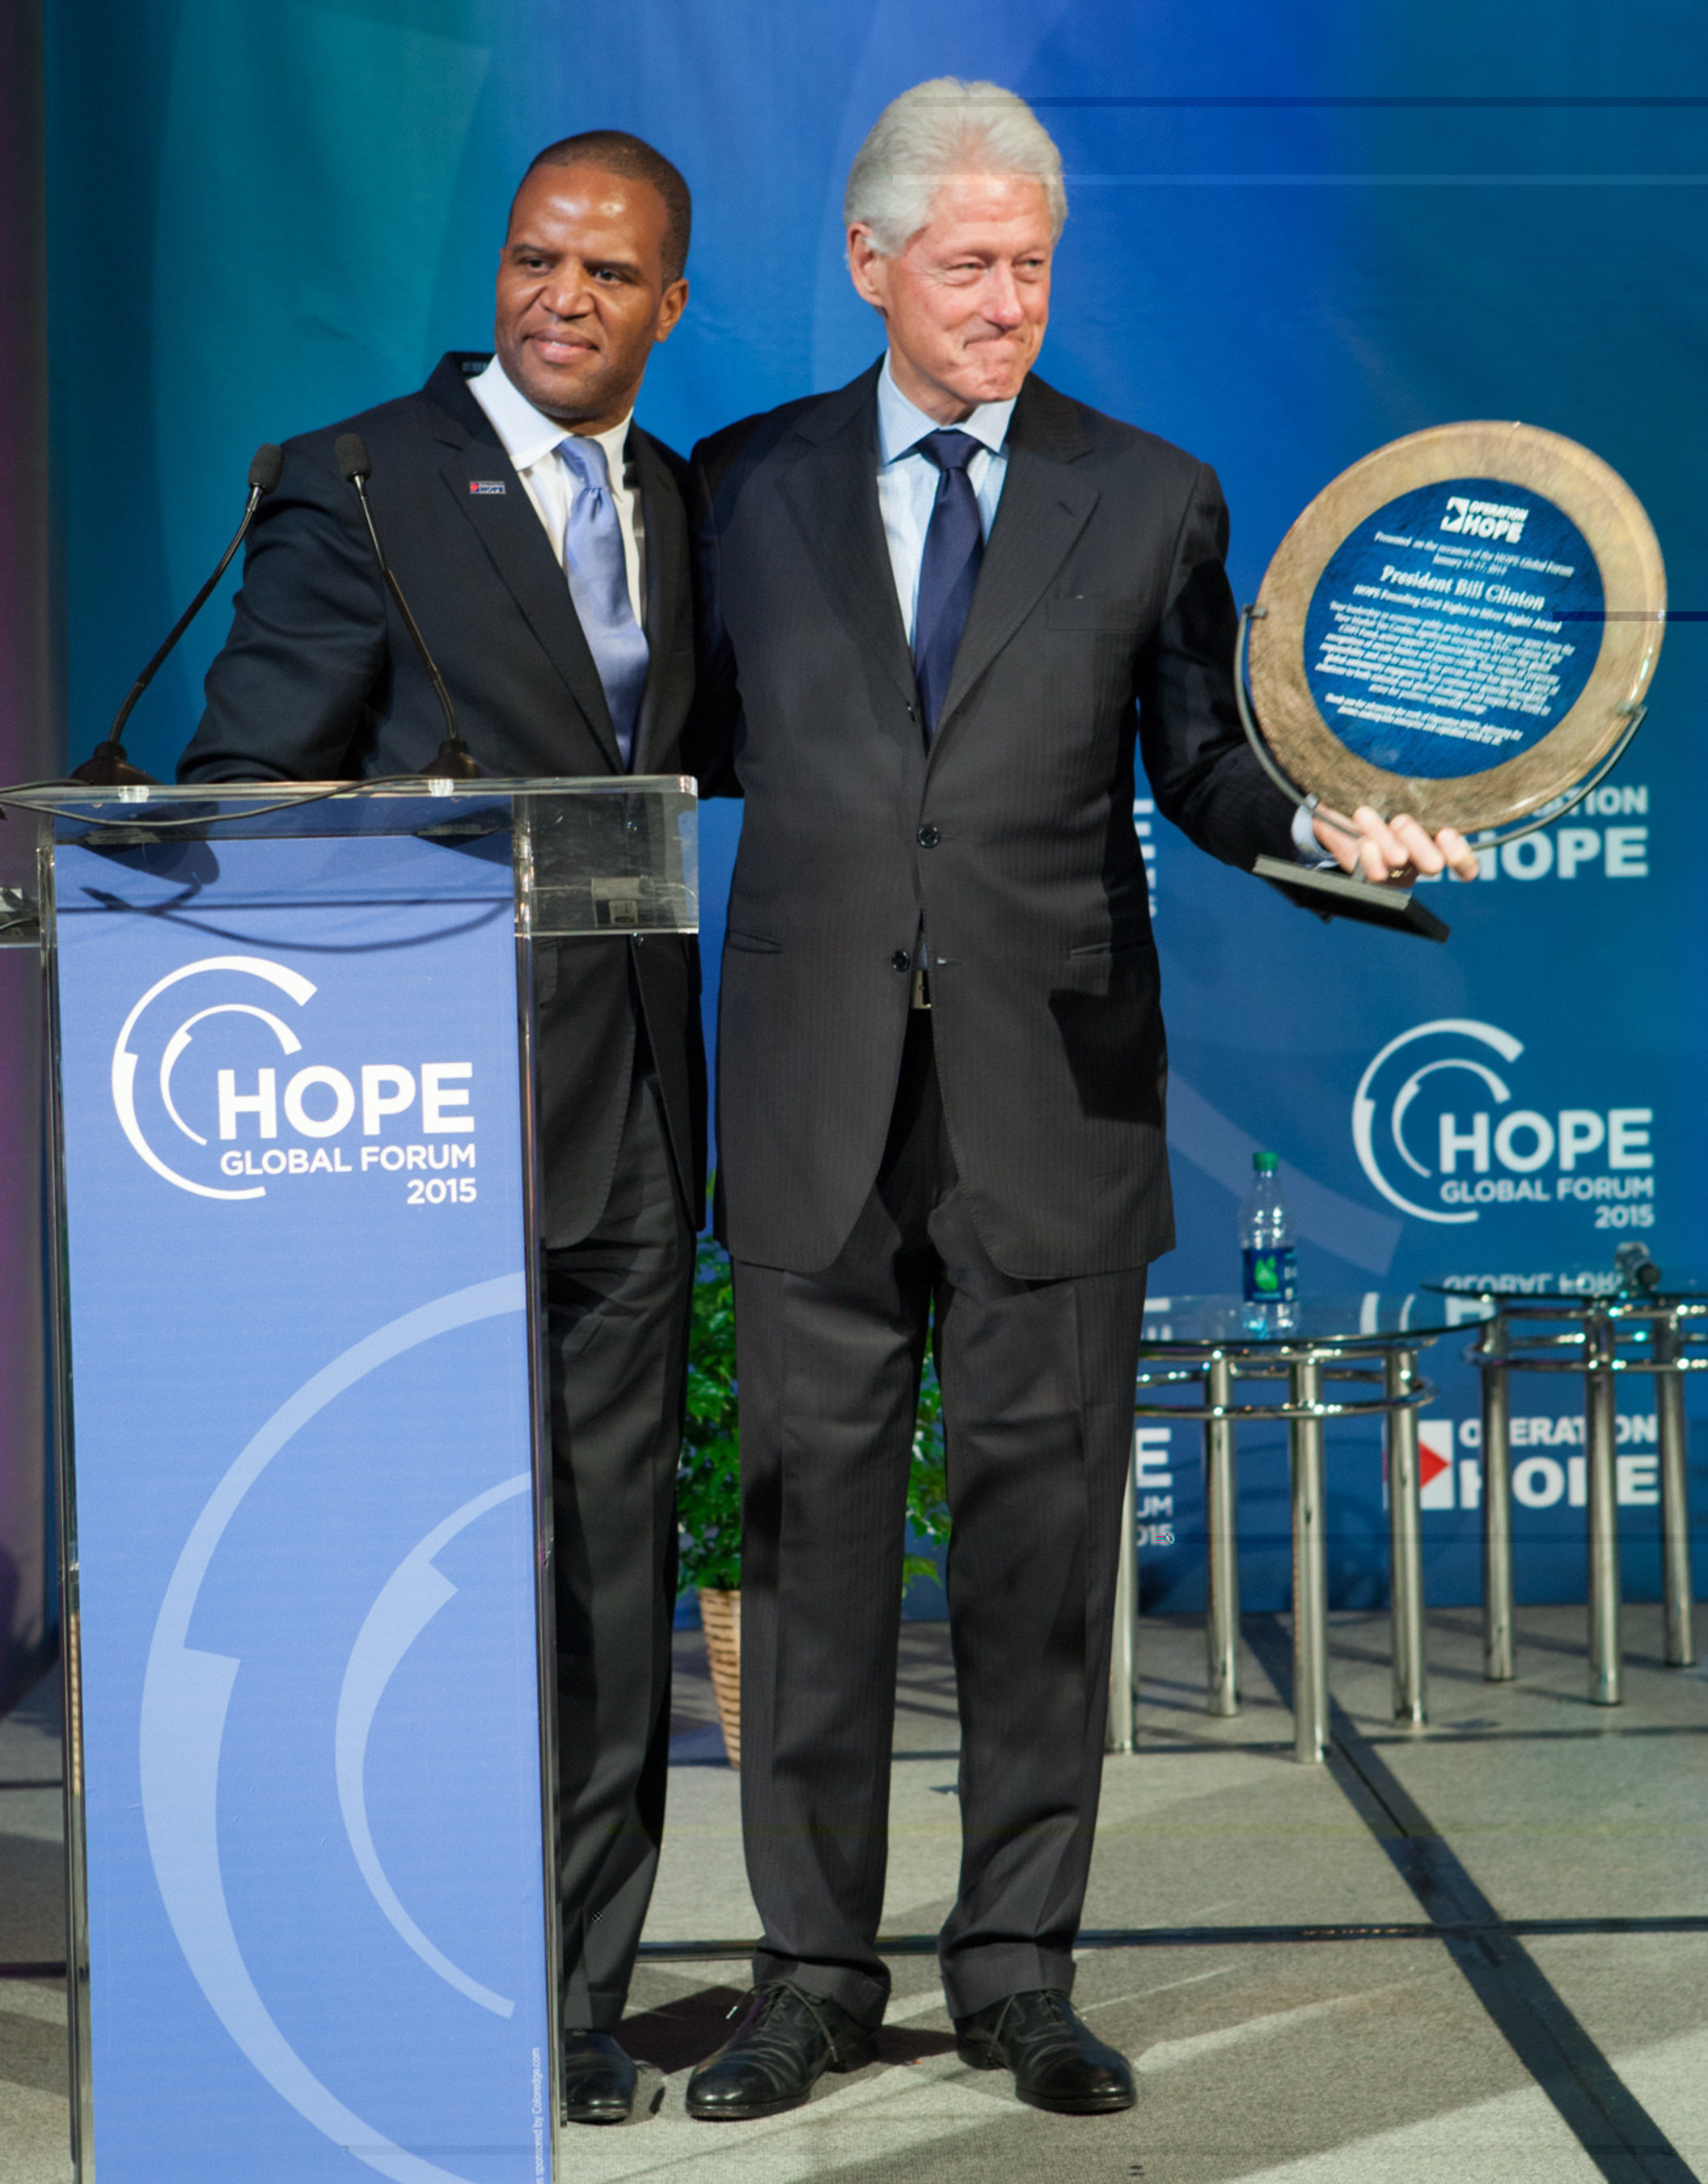 Operation HOPE president and founder John Hope Bryant presents the "Civil Rights to Silver Rights Award" to President Bill Clinton.